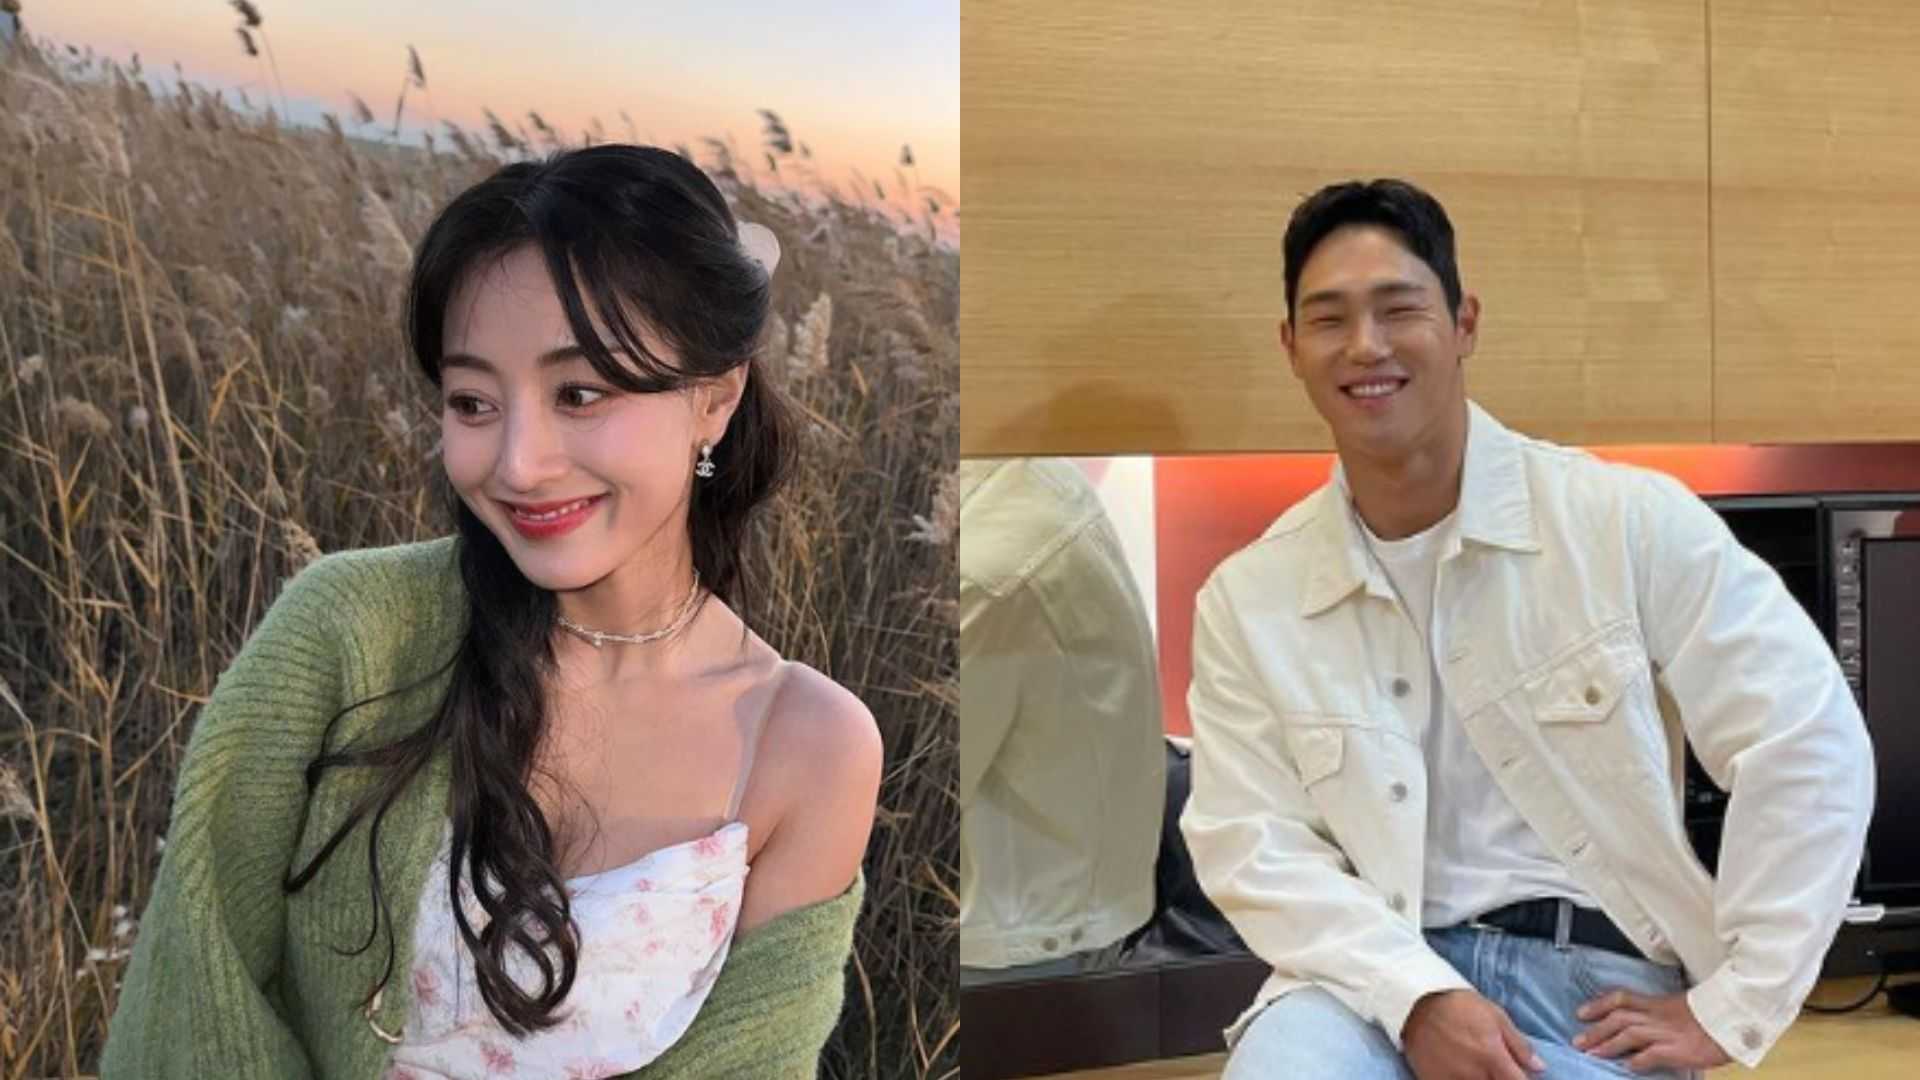 TWICE's Jihyo and Olympic skeleton racer Yun Sung Bin reportedly dating